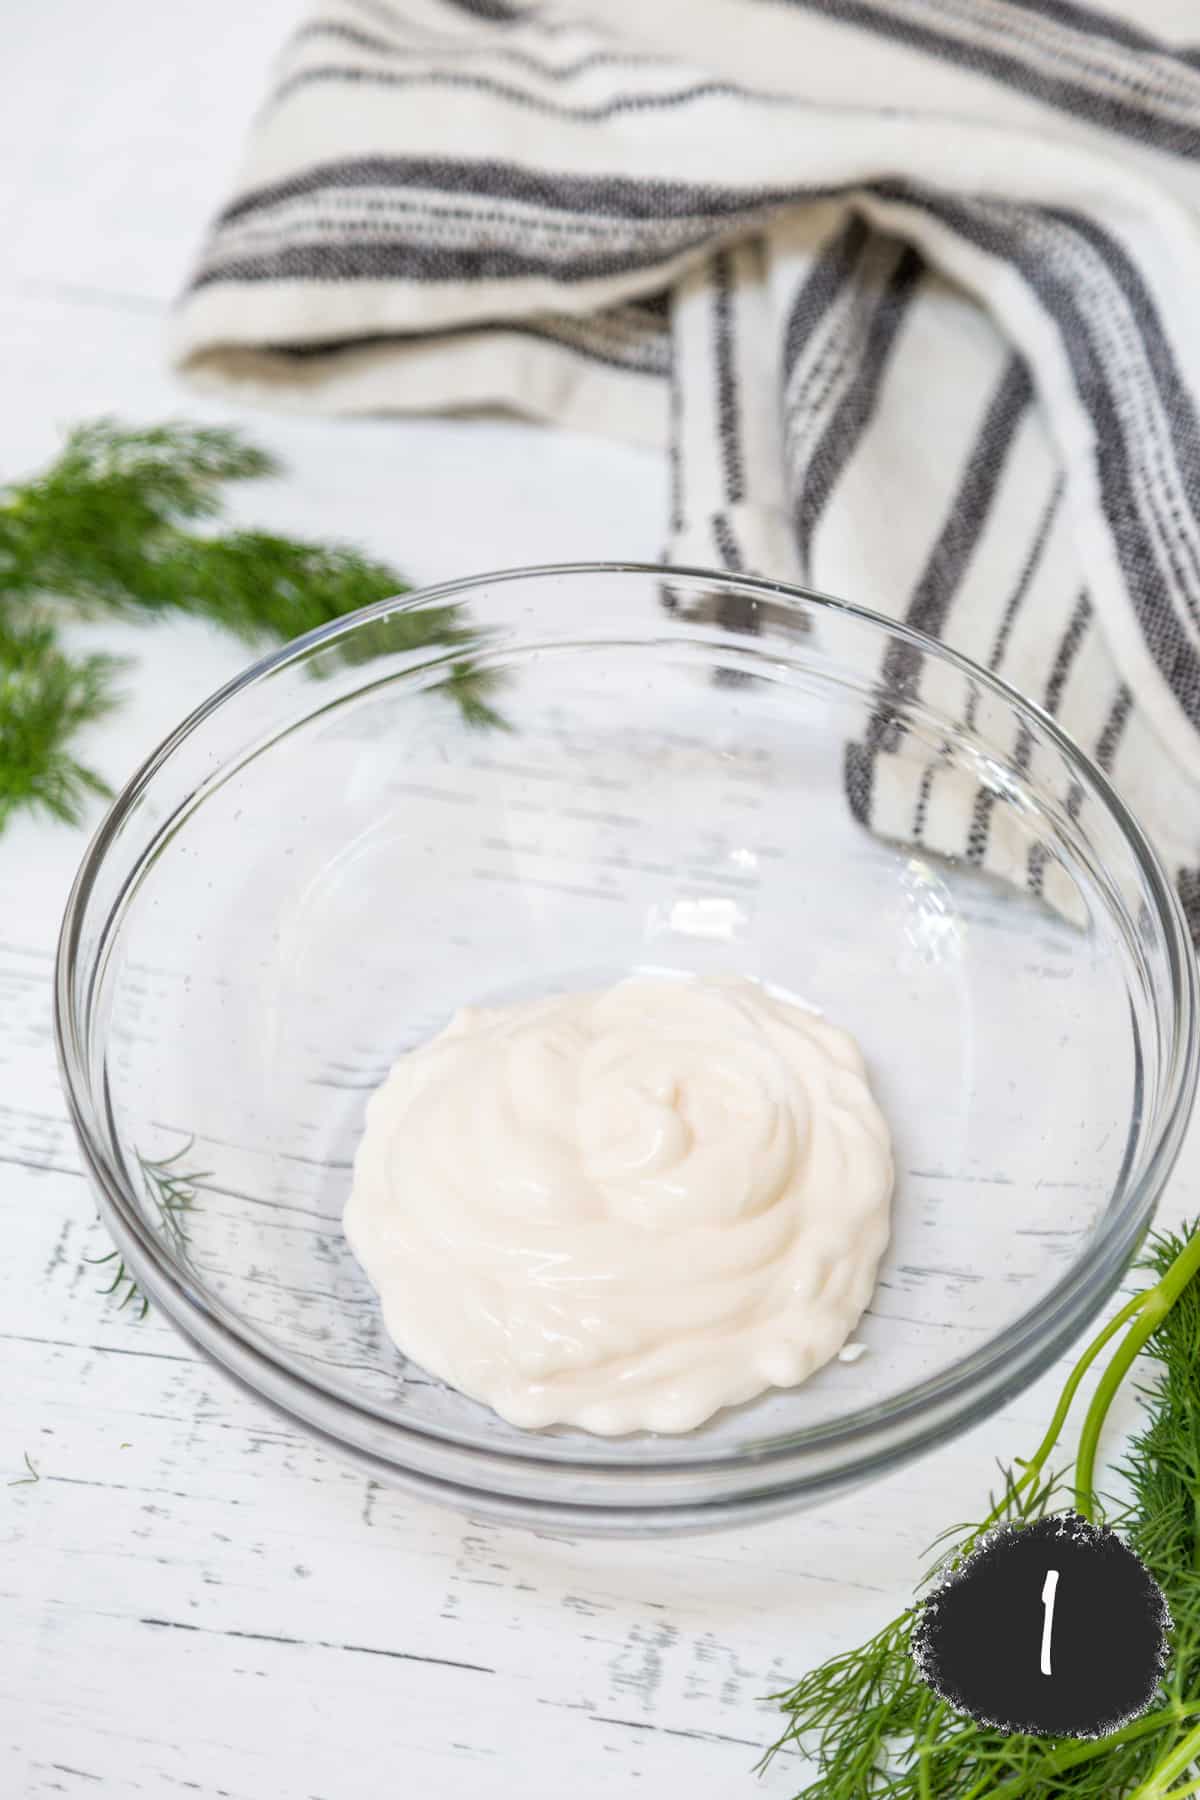 A glass bowl with mayo and dill on the side.